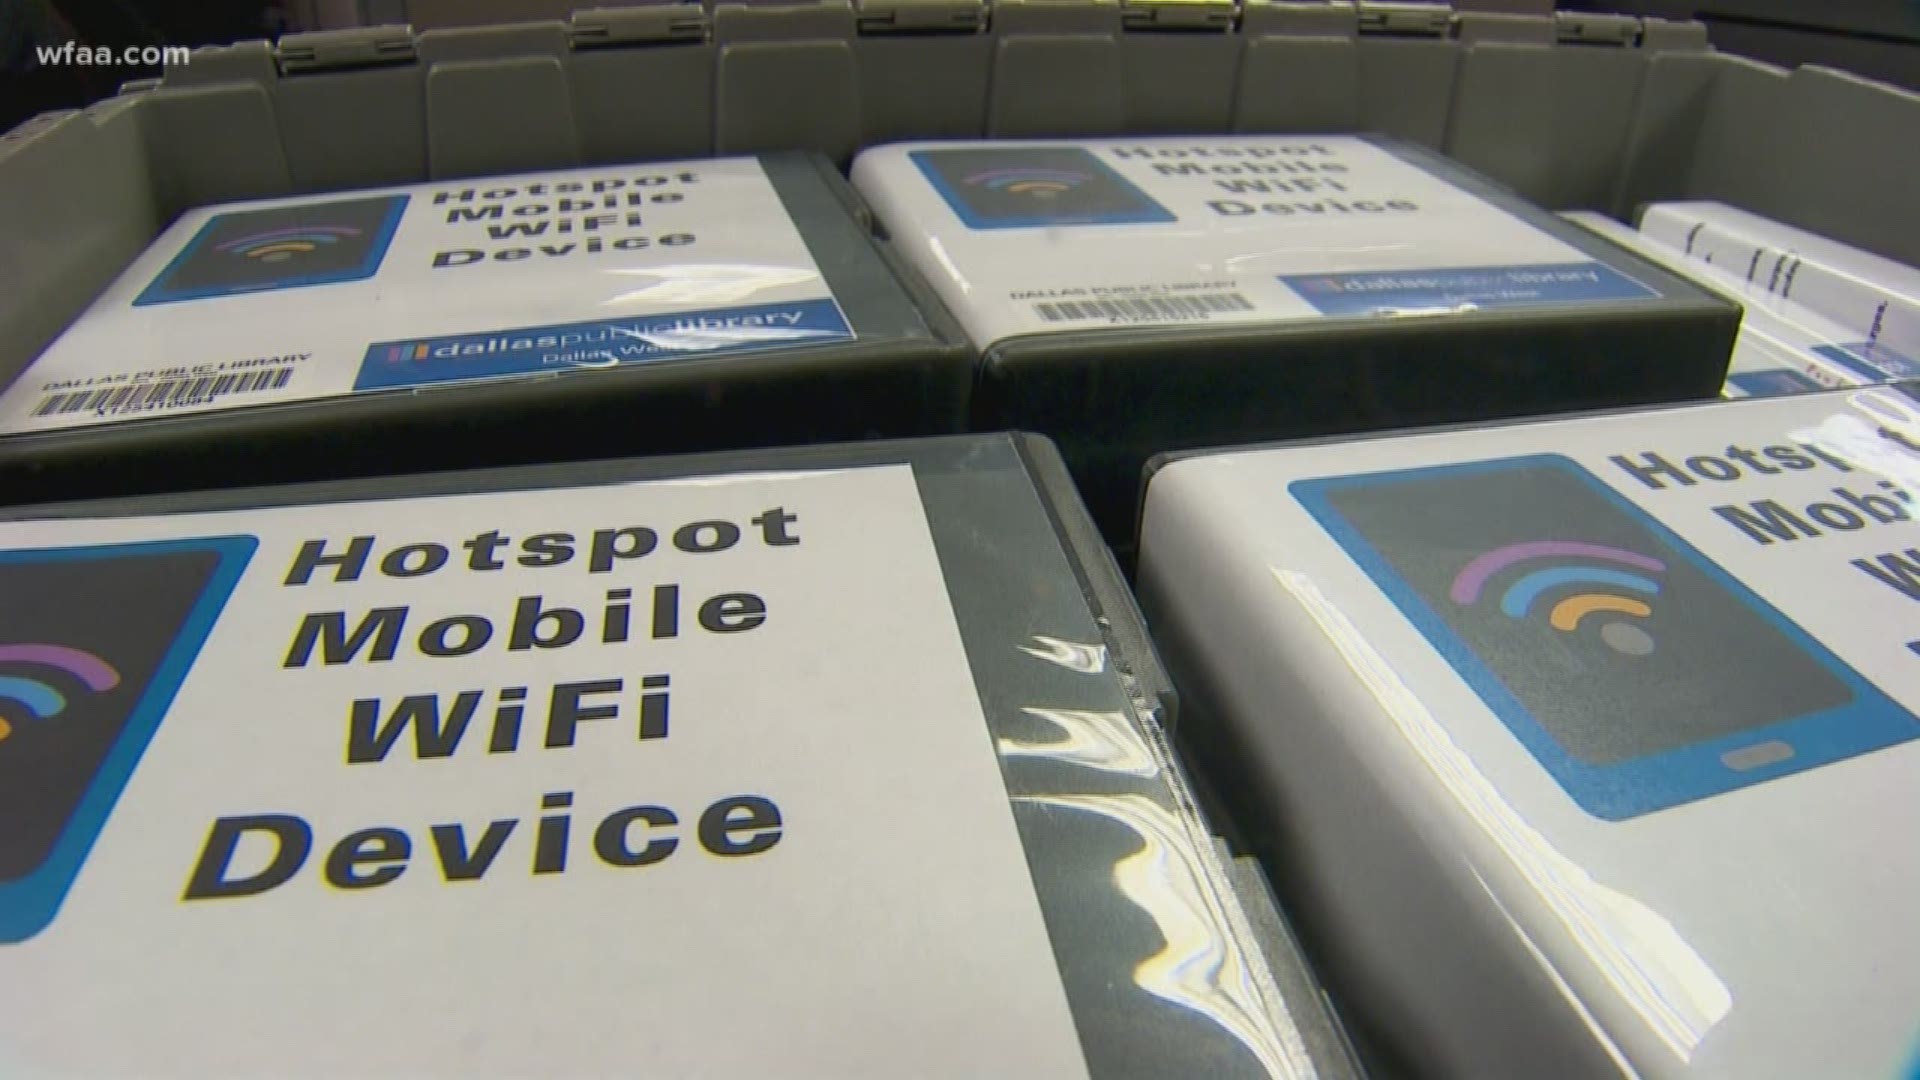 Library card holders in the City of Dallas can begin checking out mobile hotspot devices beginning in March.